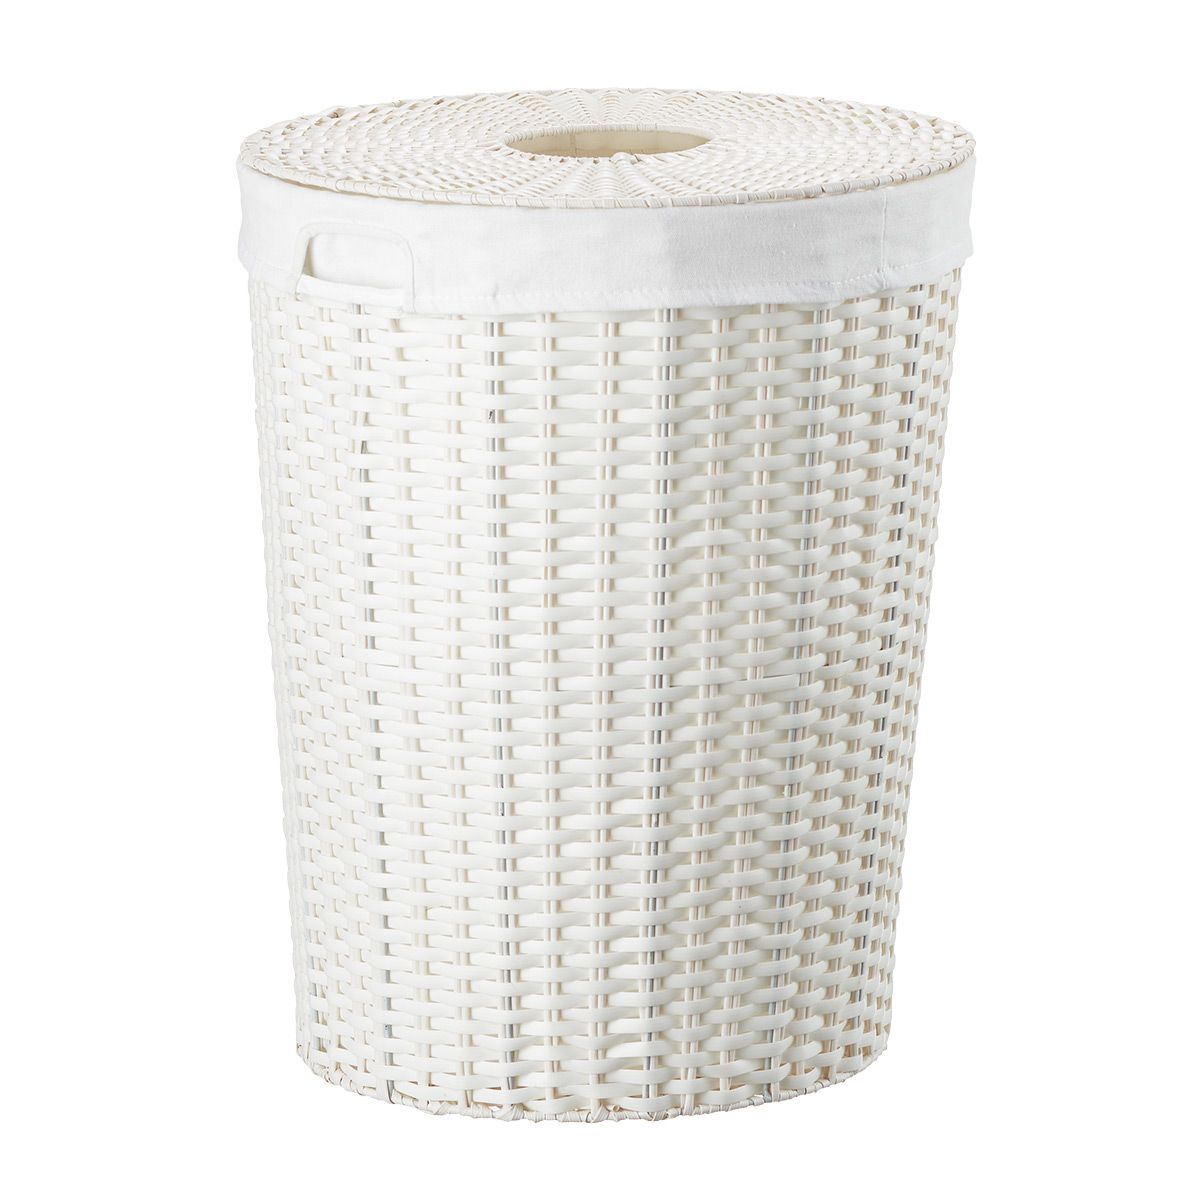 The Container Store Montauk Round Hamper | The Container Store